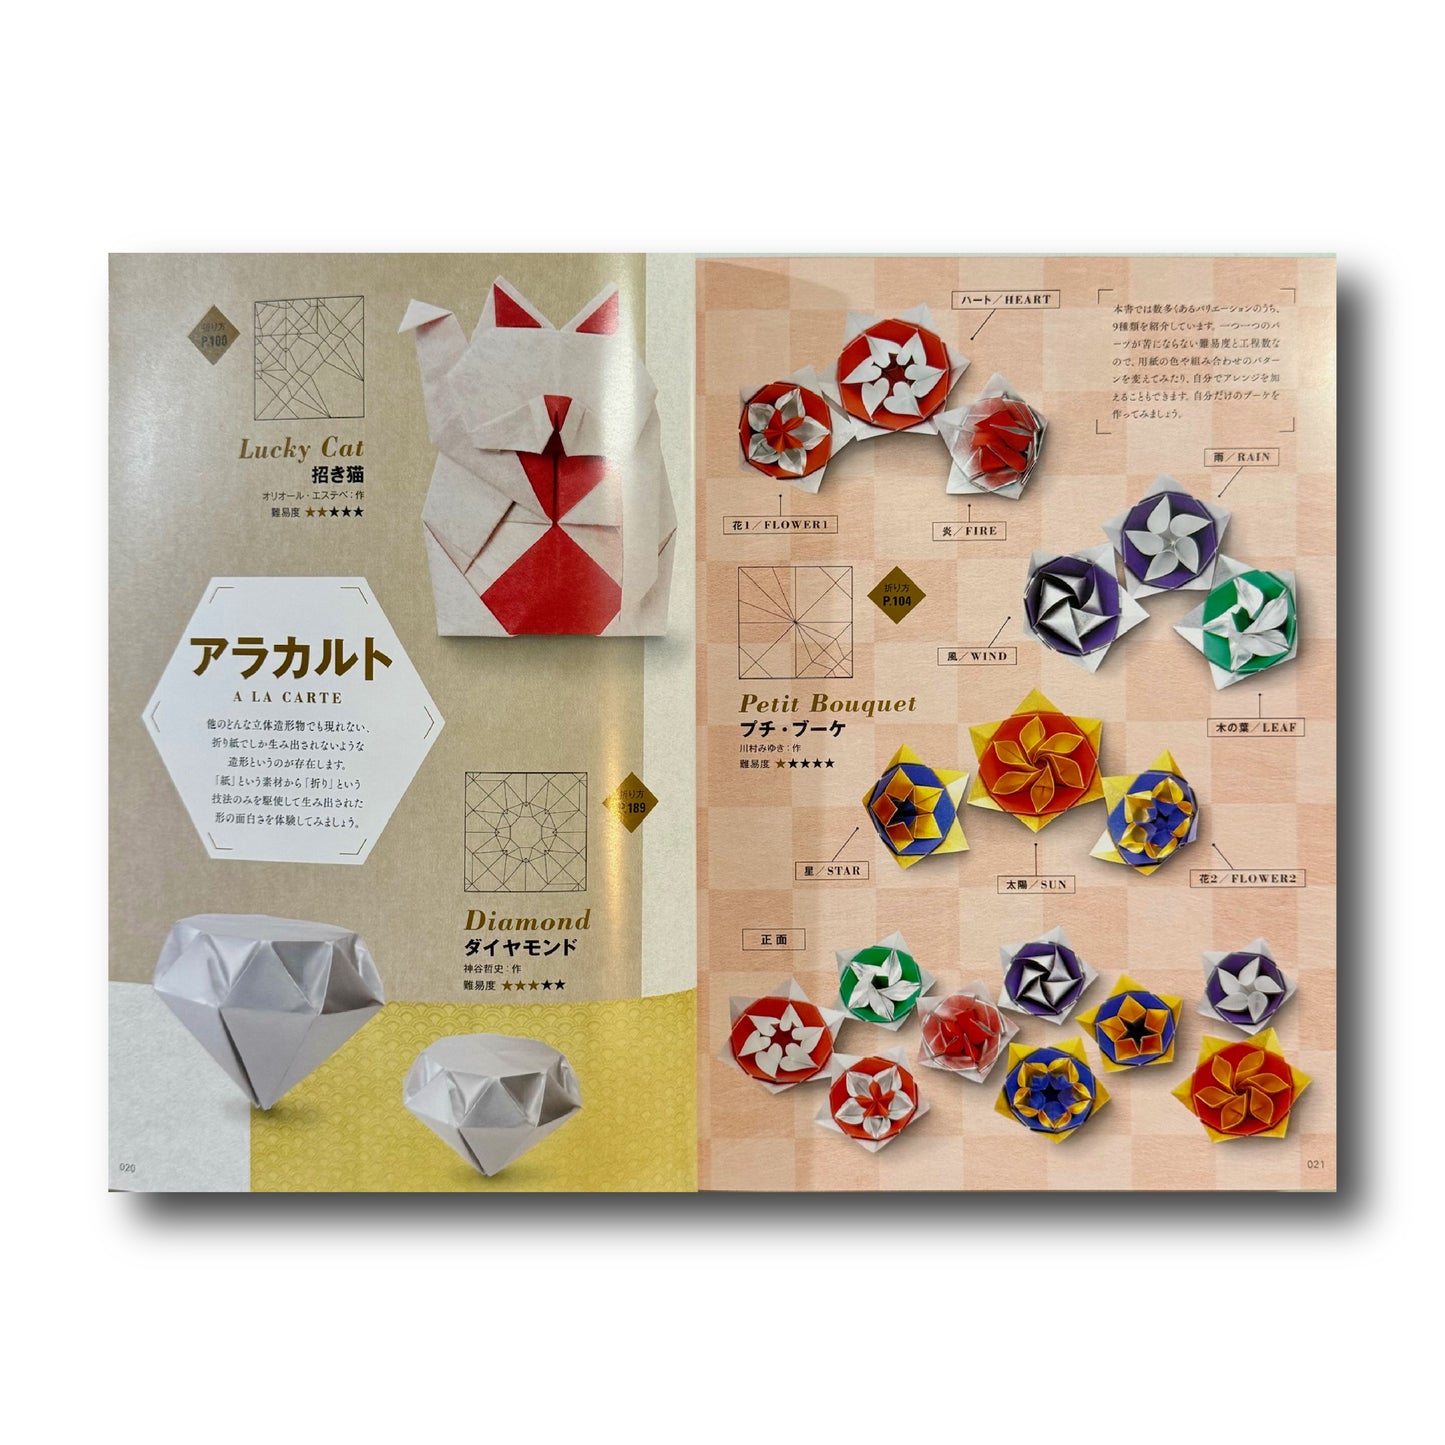 The Elegance of Origami (Japanese Edition)